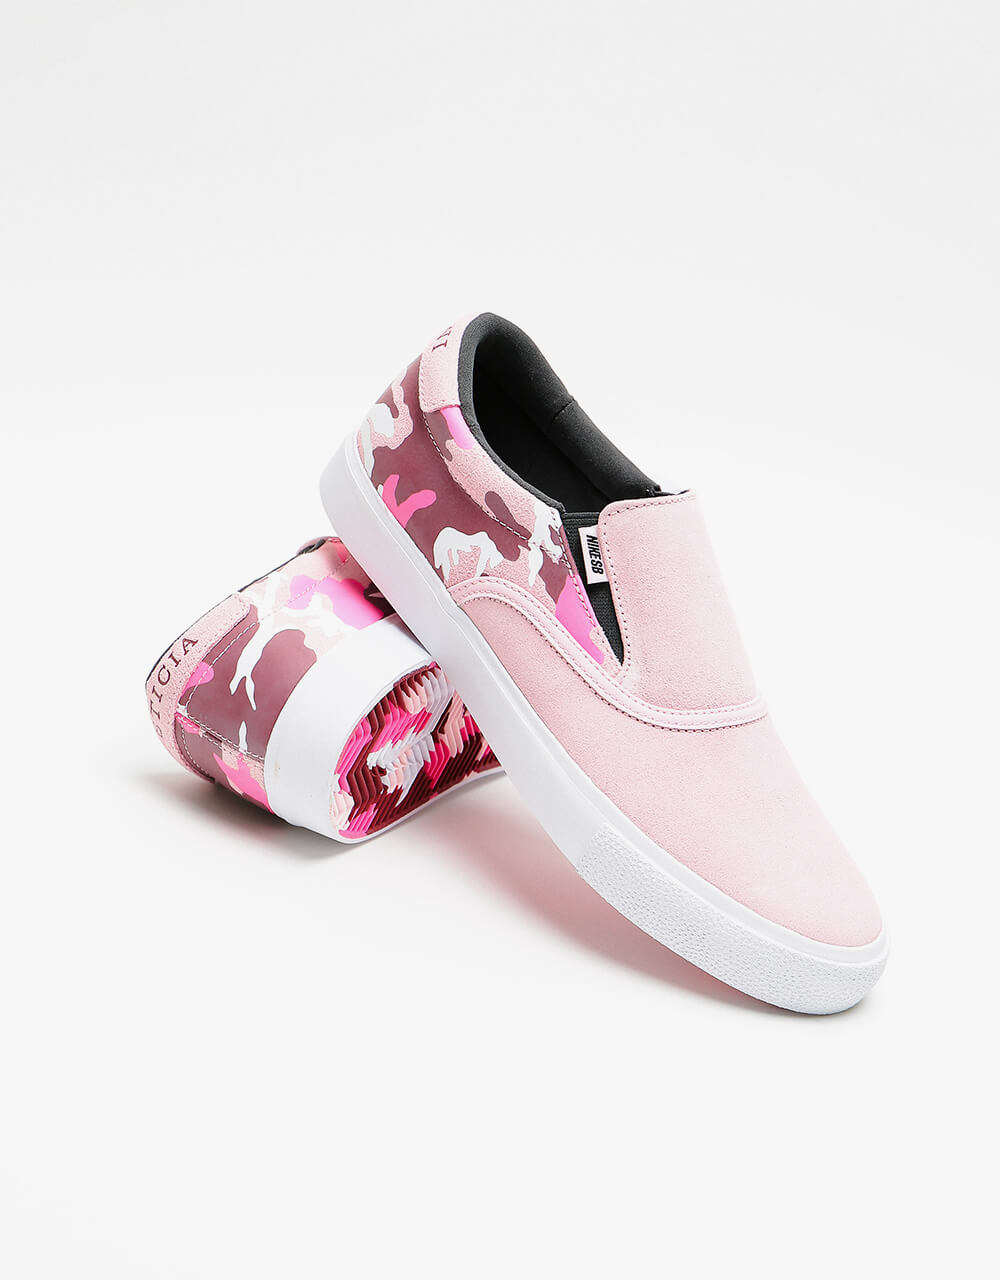 Nike SB Zoom Verona Slip LB Skate Shoes - Prism Pink/Team Red-Pinksicl –  Route One